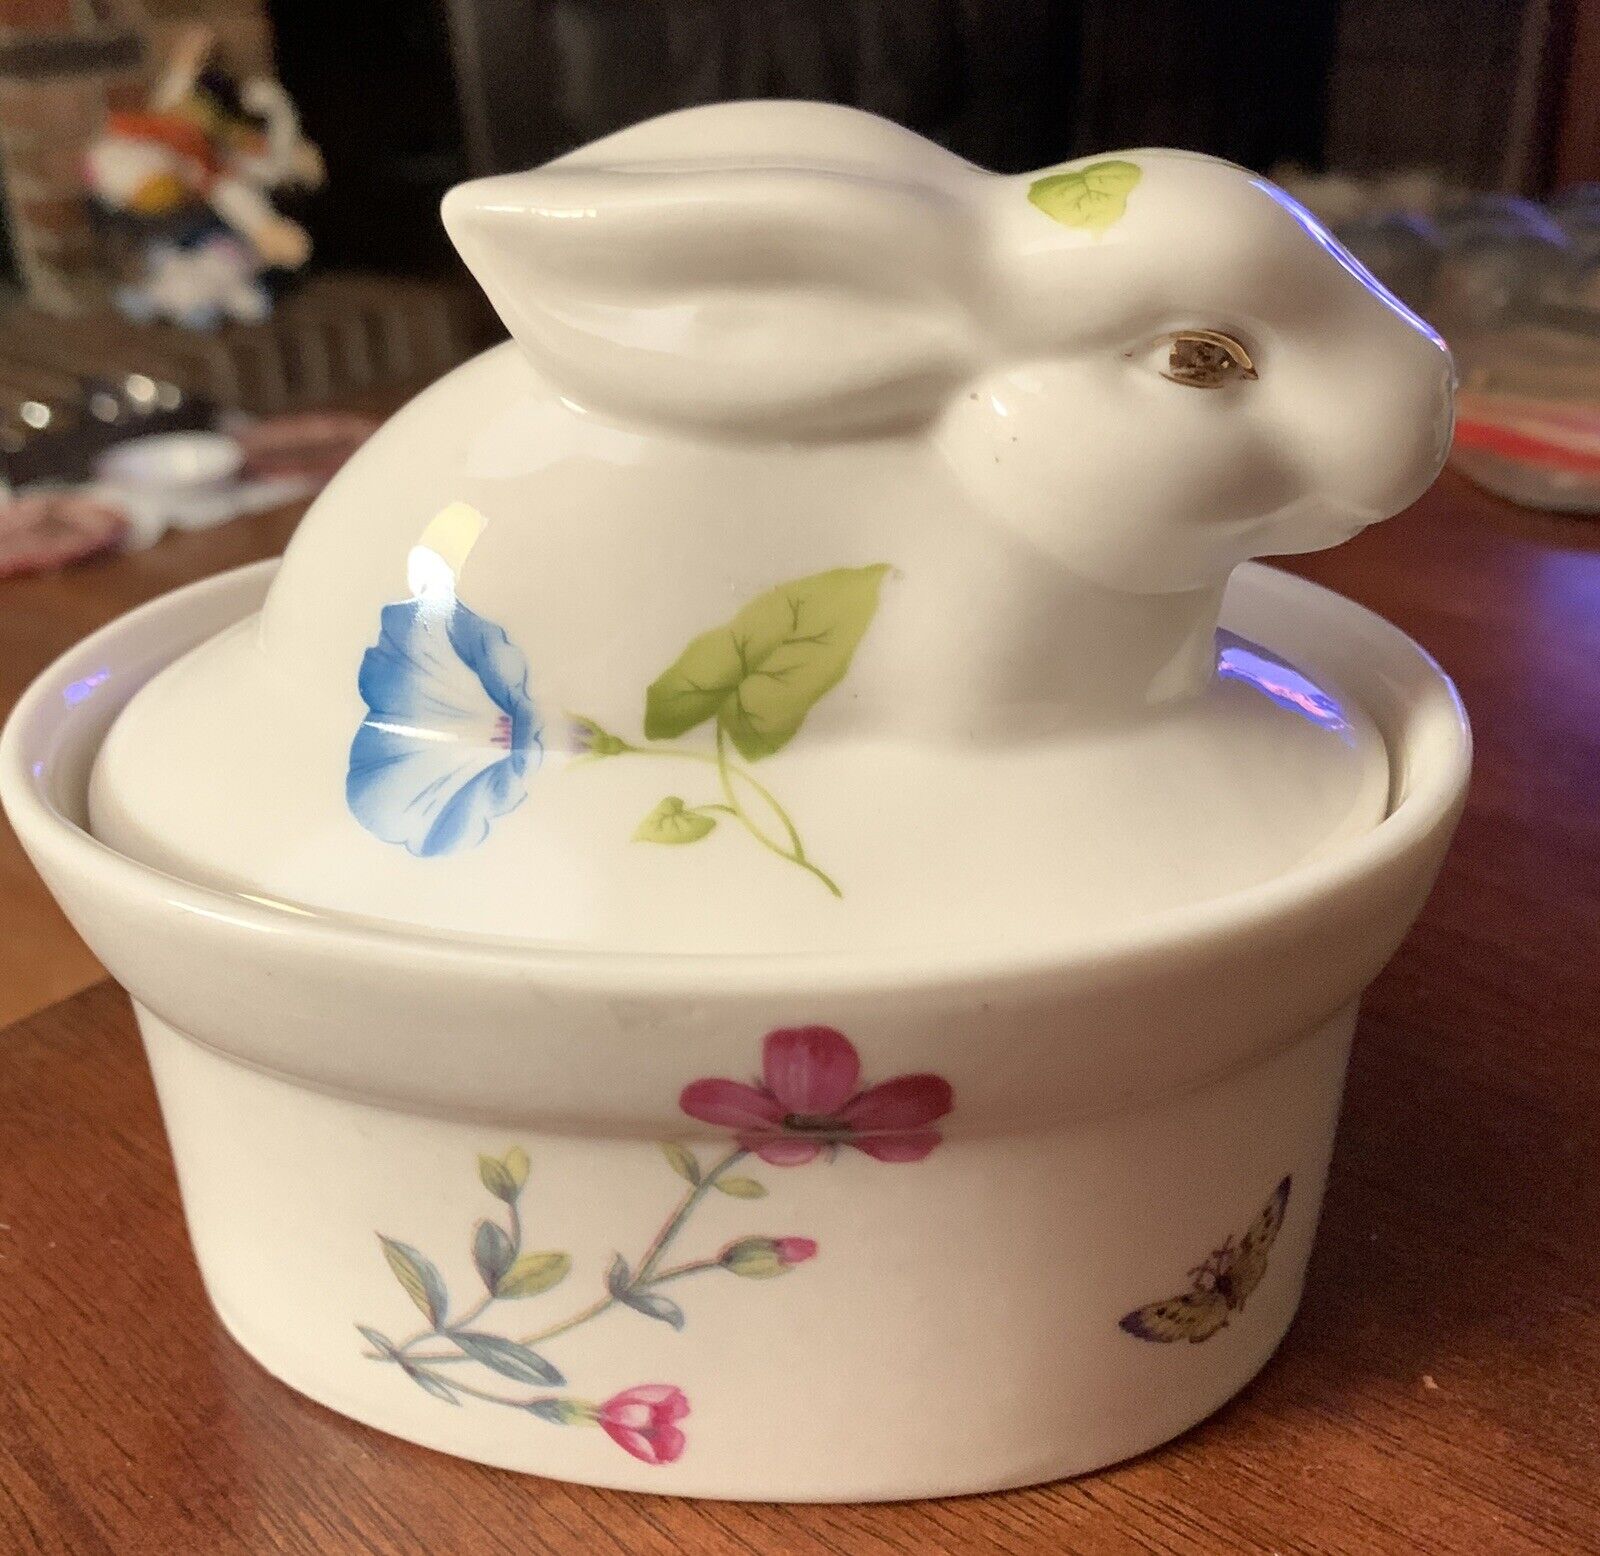 DISH/BOWL LIDDED GRACE\'S TEAWARE OVAL CANDY WITH RABBIT FIGURE & FLORAL DETAILS